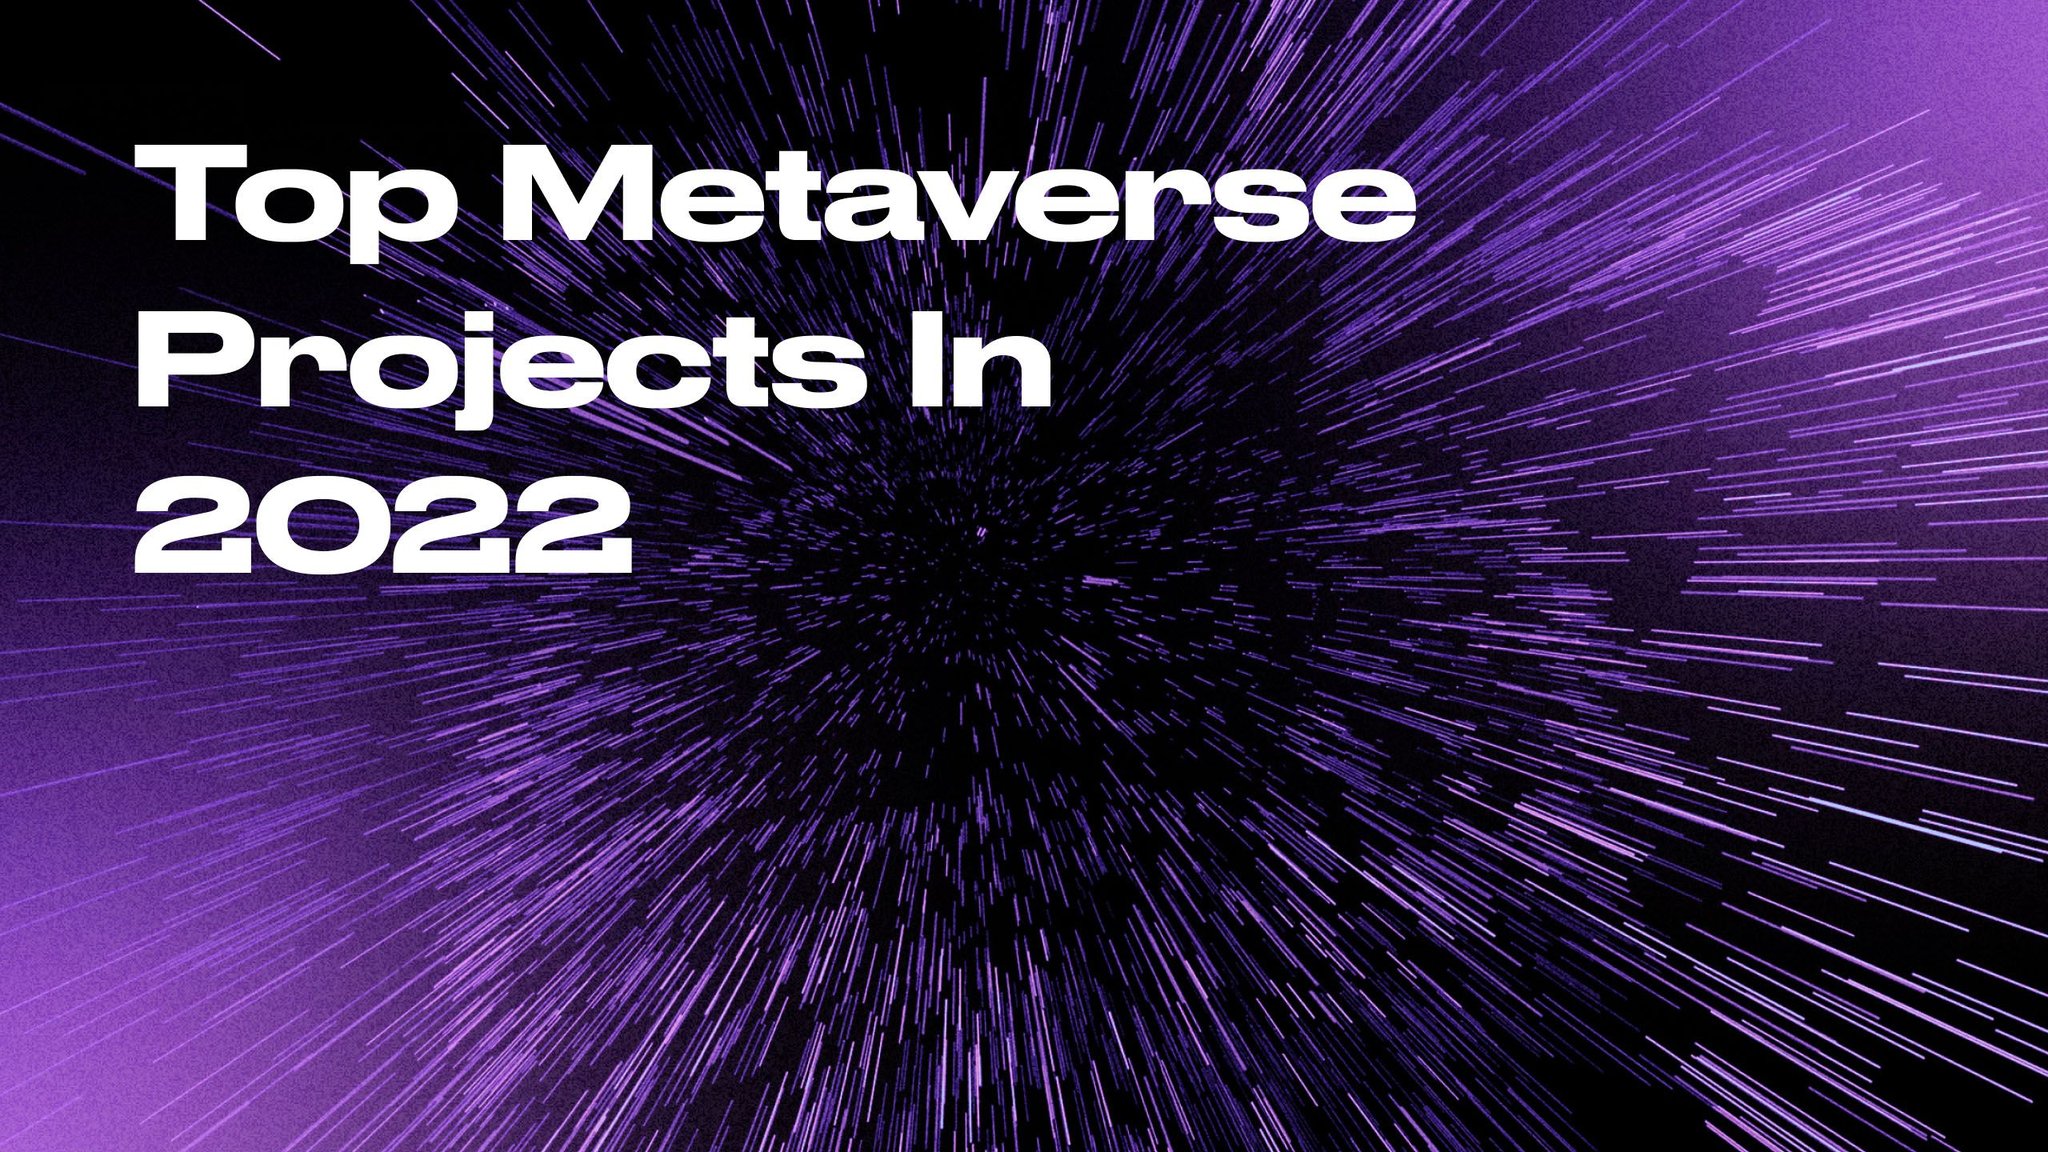 Top 10 Projects In Metaverse To look out for in 2023